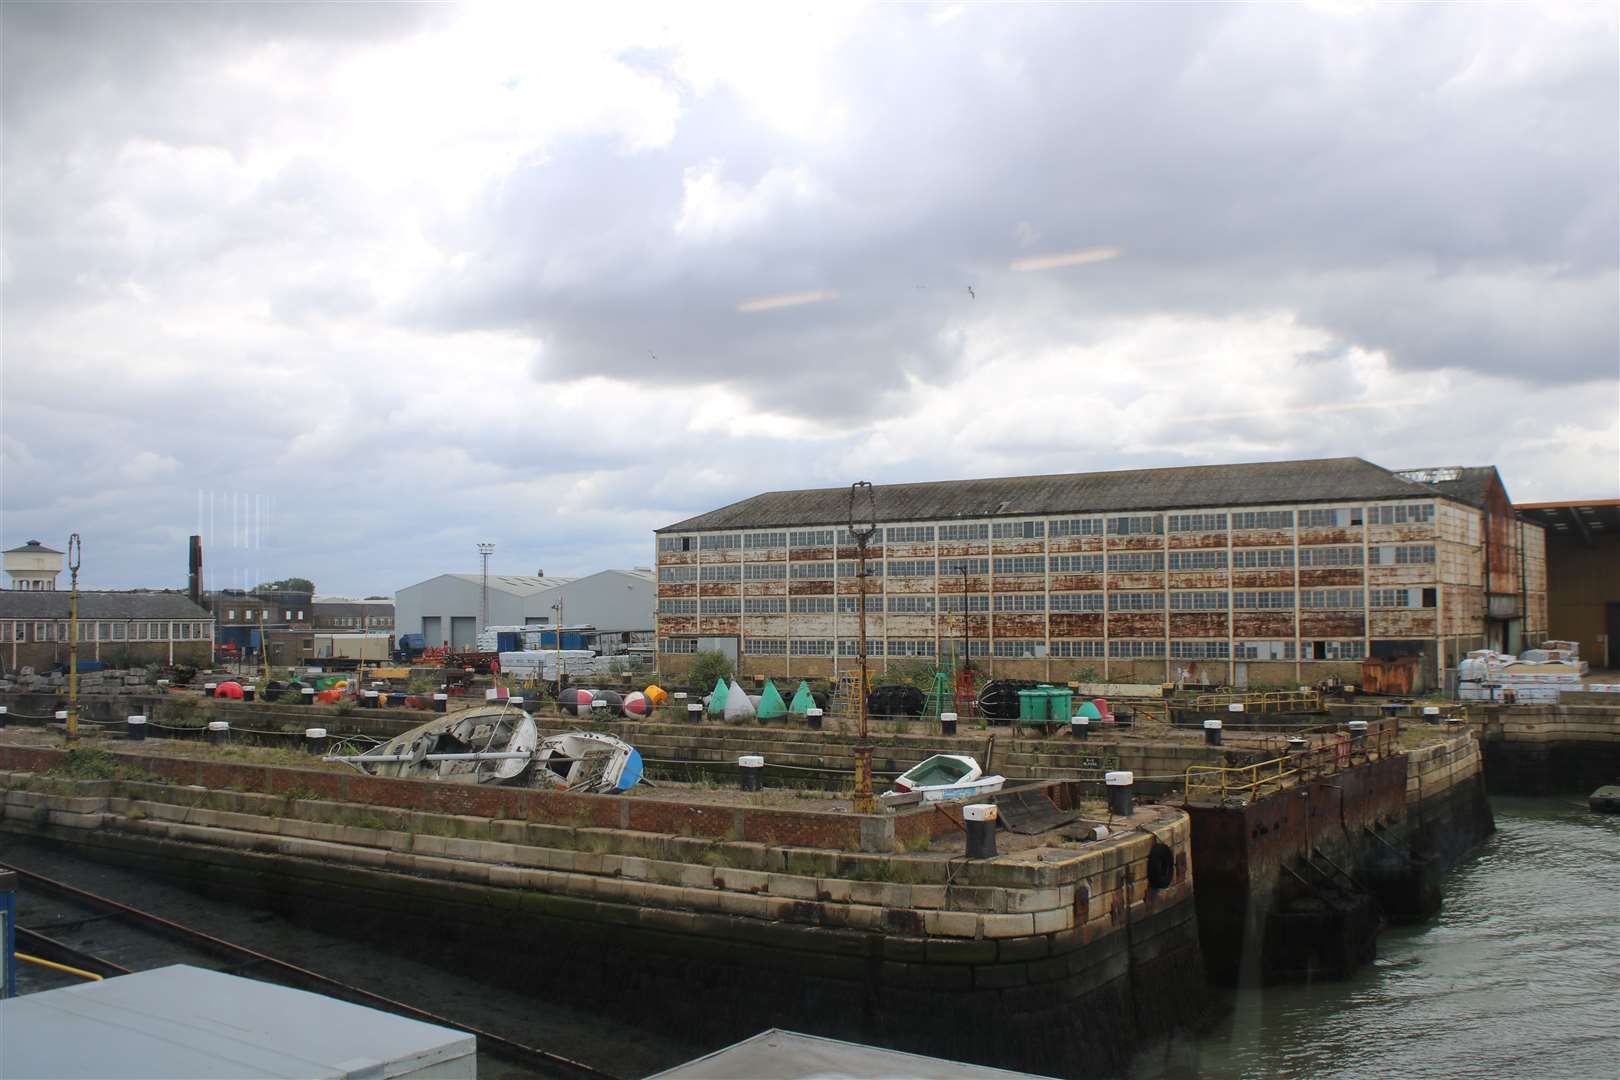 The historic Boat Store in Sheerness Docks. Its cast iron frame was the forerunner of today's skyscrapers. Picture: Clive Holden (55165220)